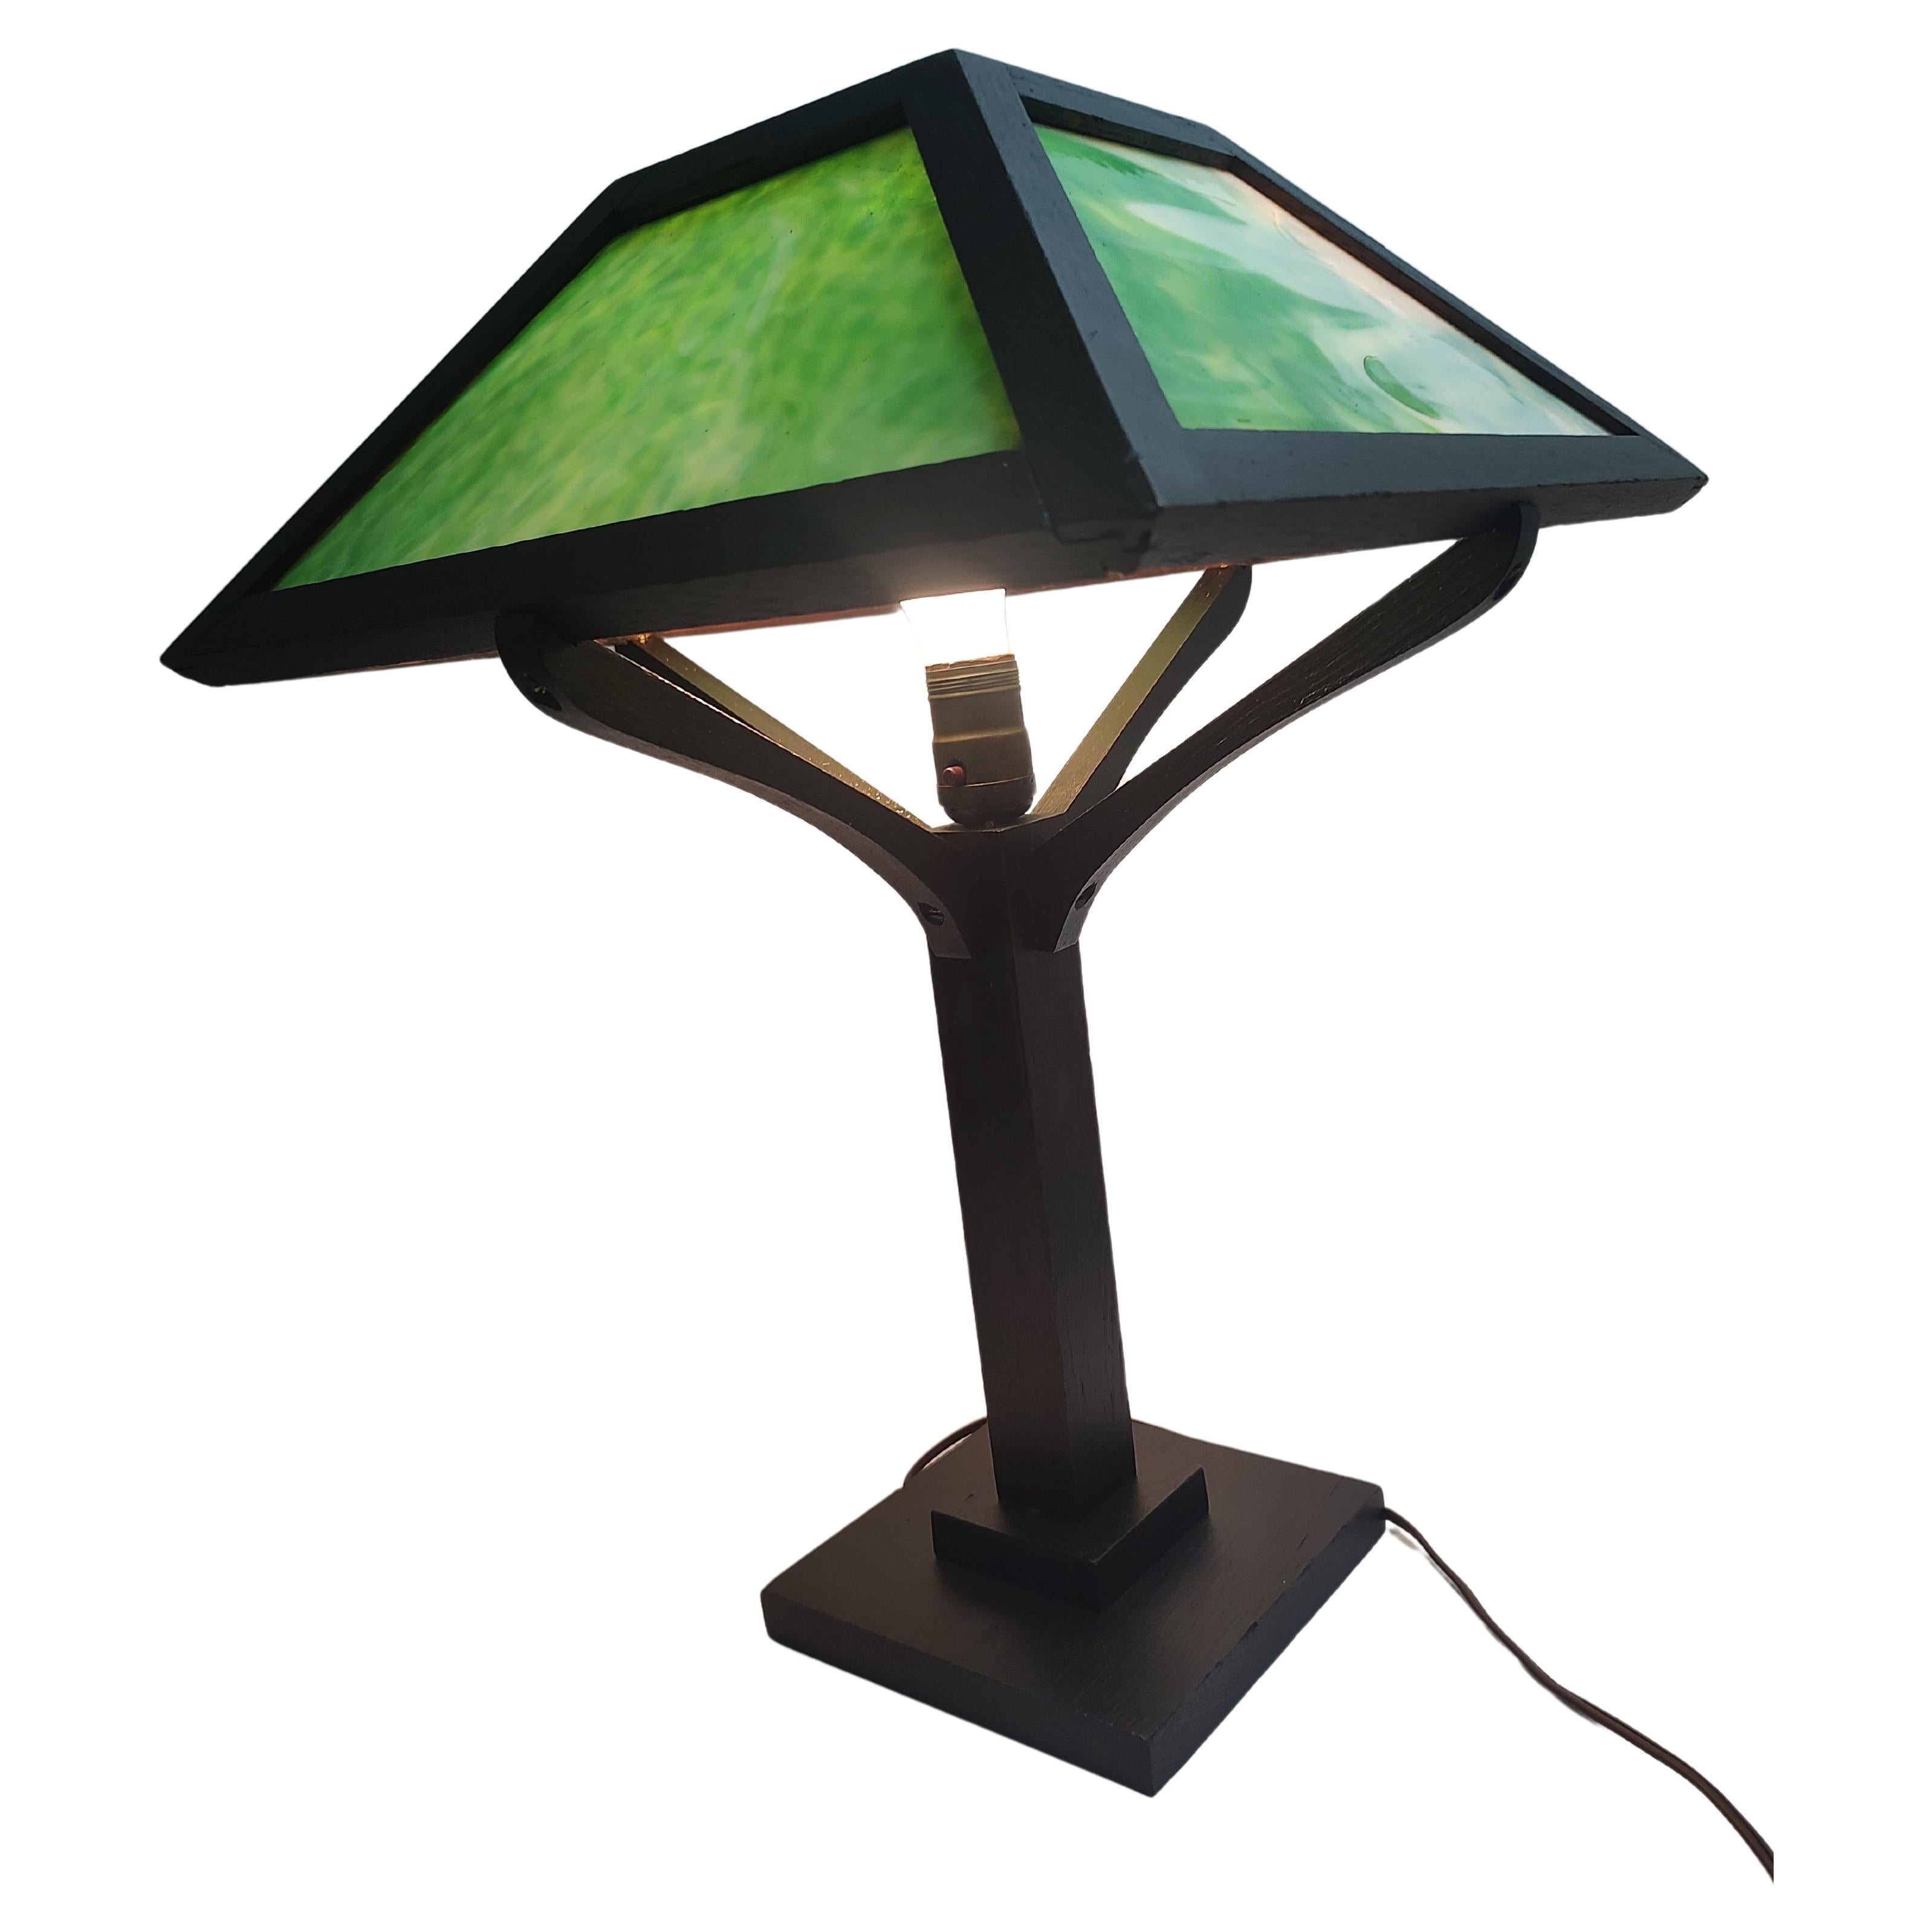 Beautiful green Slag Glass panels give off a charming and warm glow when lit. C1912 lamp is in excellent antique condition and has recently been refinished with a dark mission Oak stain. Wiring is sound. 
See my other mission lamps and furniture in